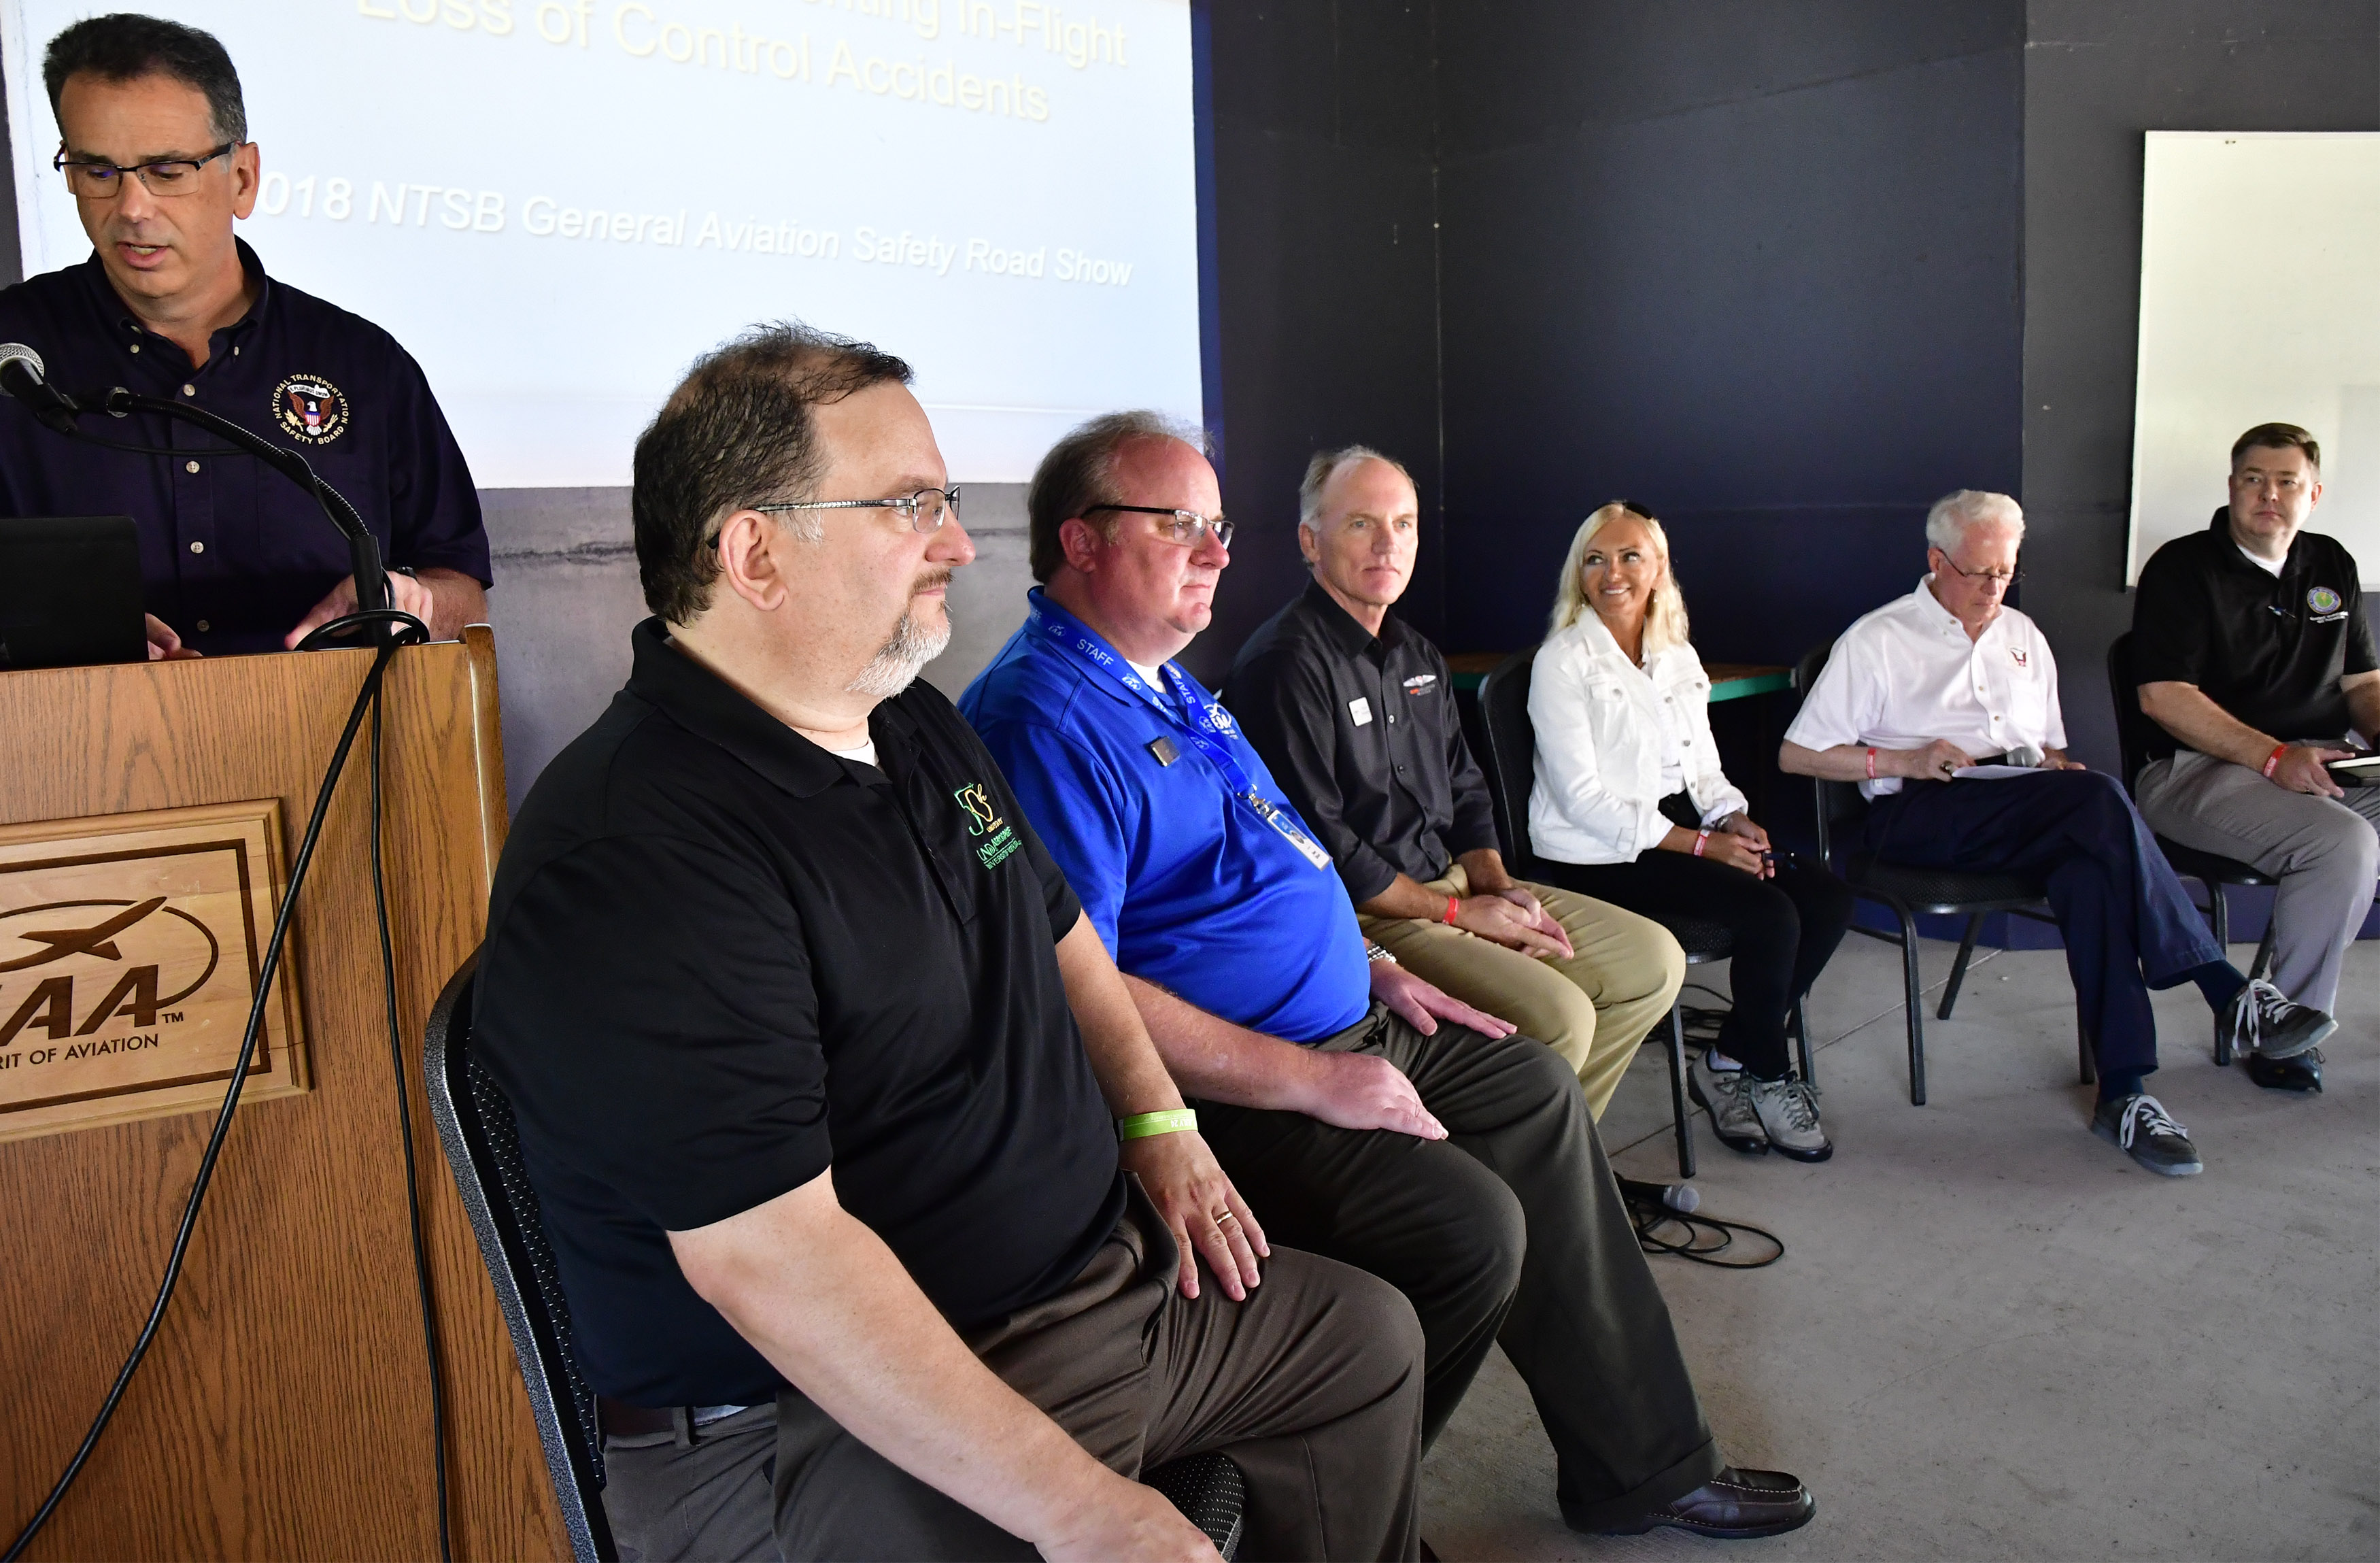 An NTSB Safety Road Show presentation on preventing in-flight loss of control included aerobatic champion Patty Wagstaff and AOPA Air Safety Institute director Richard McSpadden, center, during EAA AirVenture in Oshkosh, Wisconsin, July 24, 2018. Photo by David Tulis.